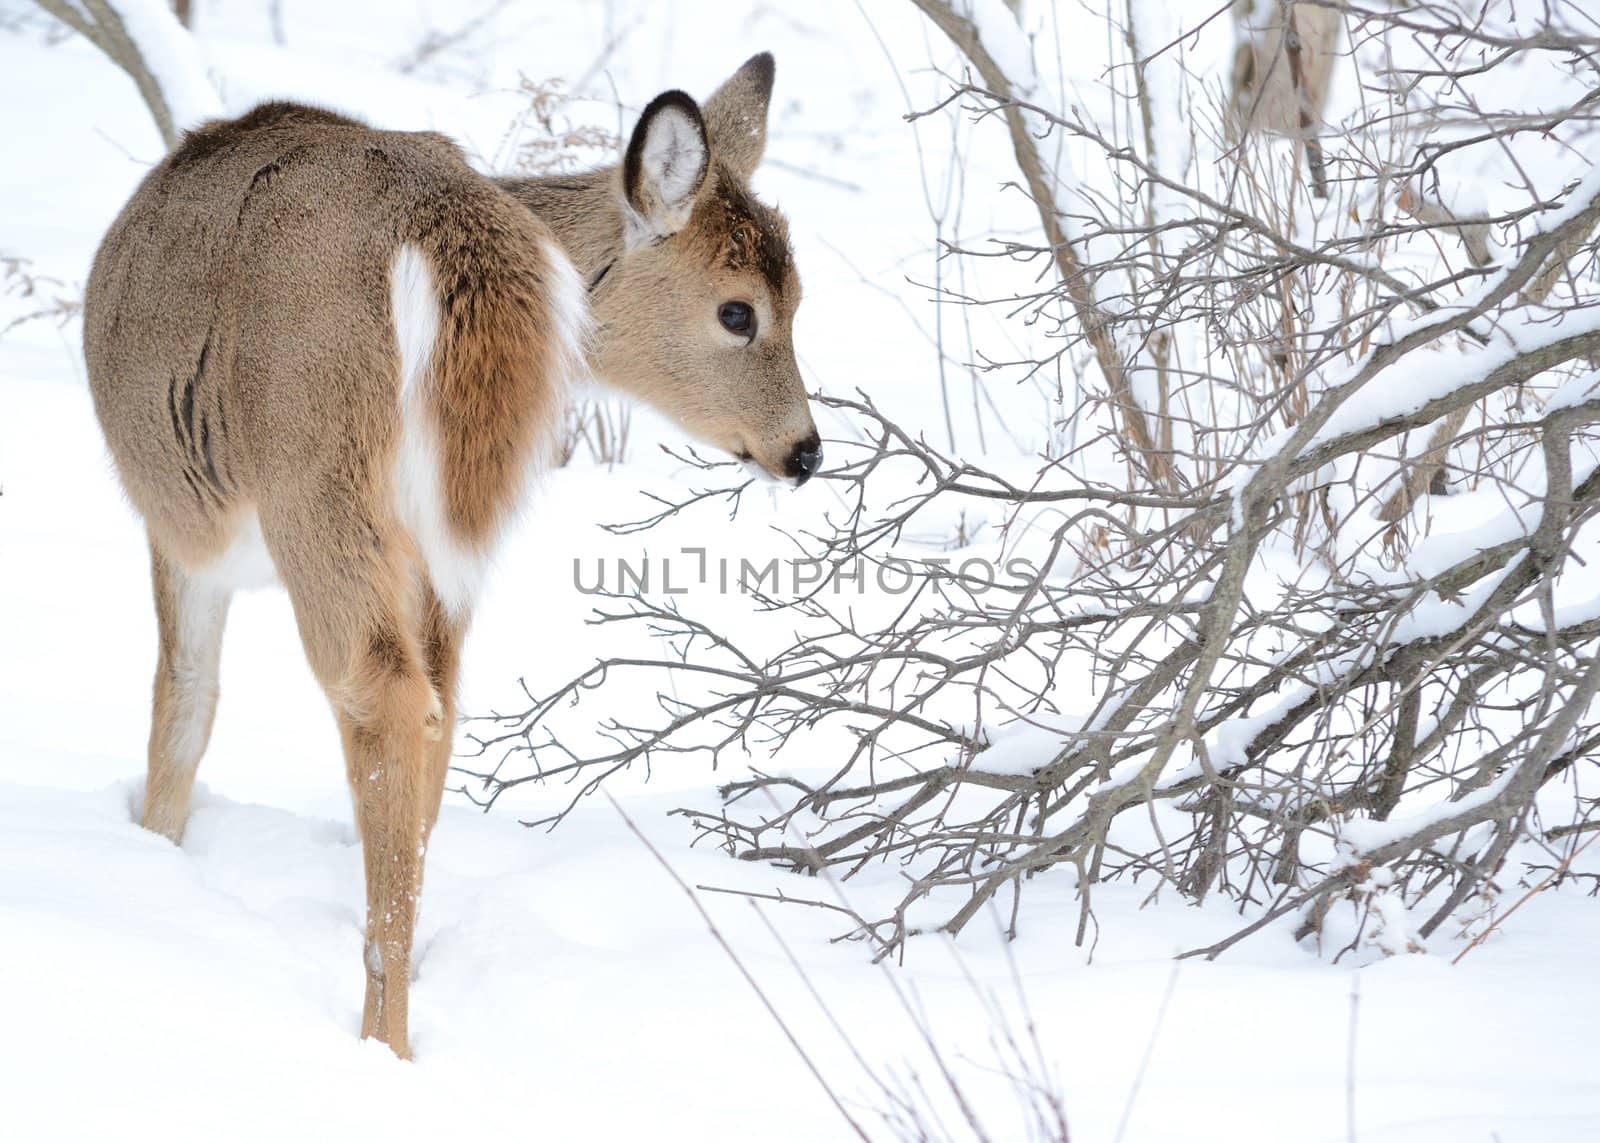 Whitetail deer yearling standing in the woods in winter snow.